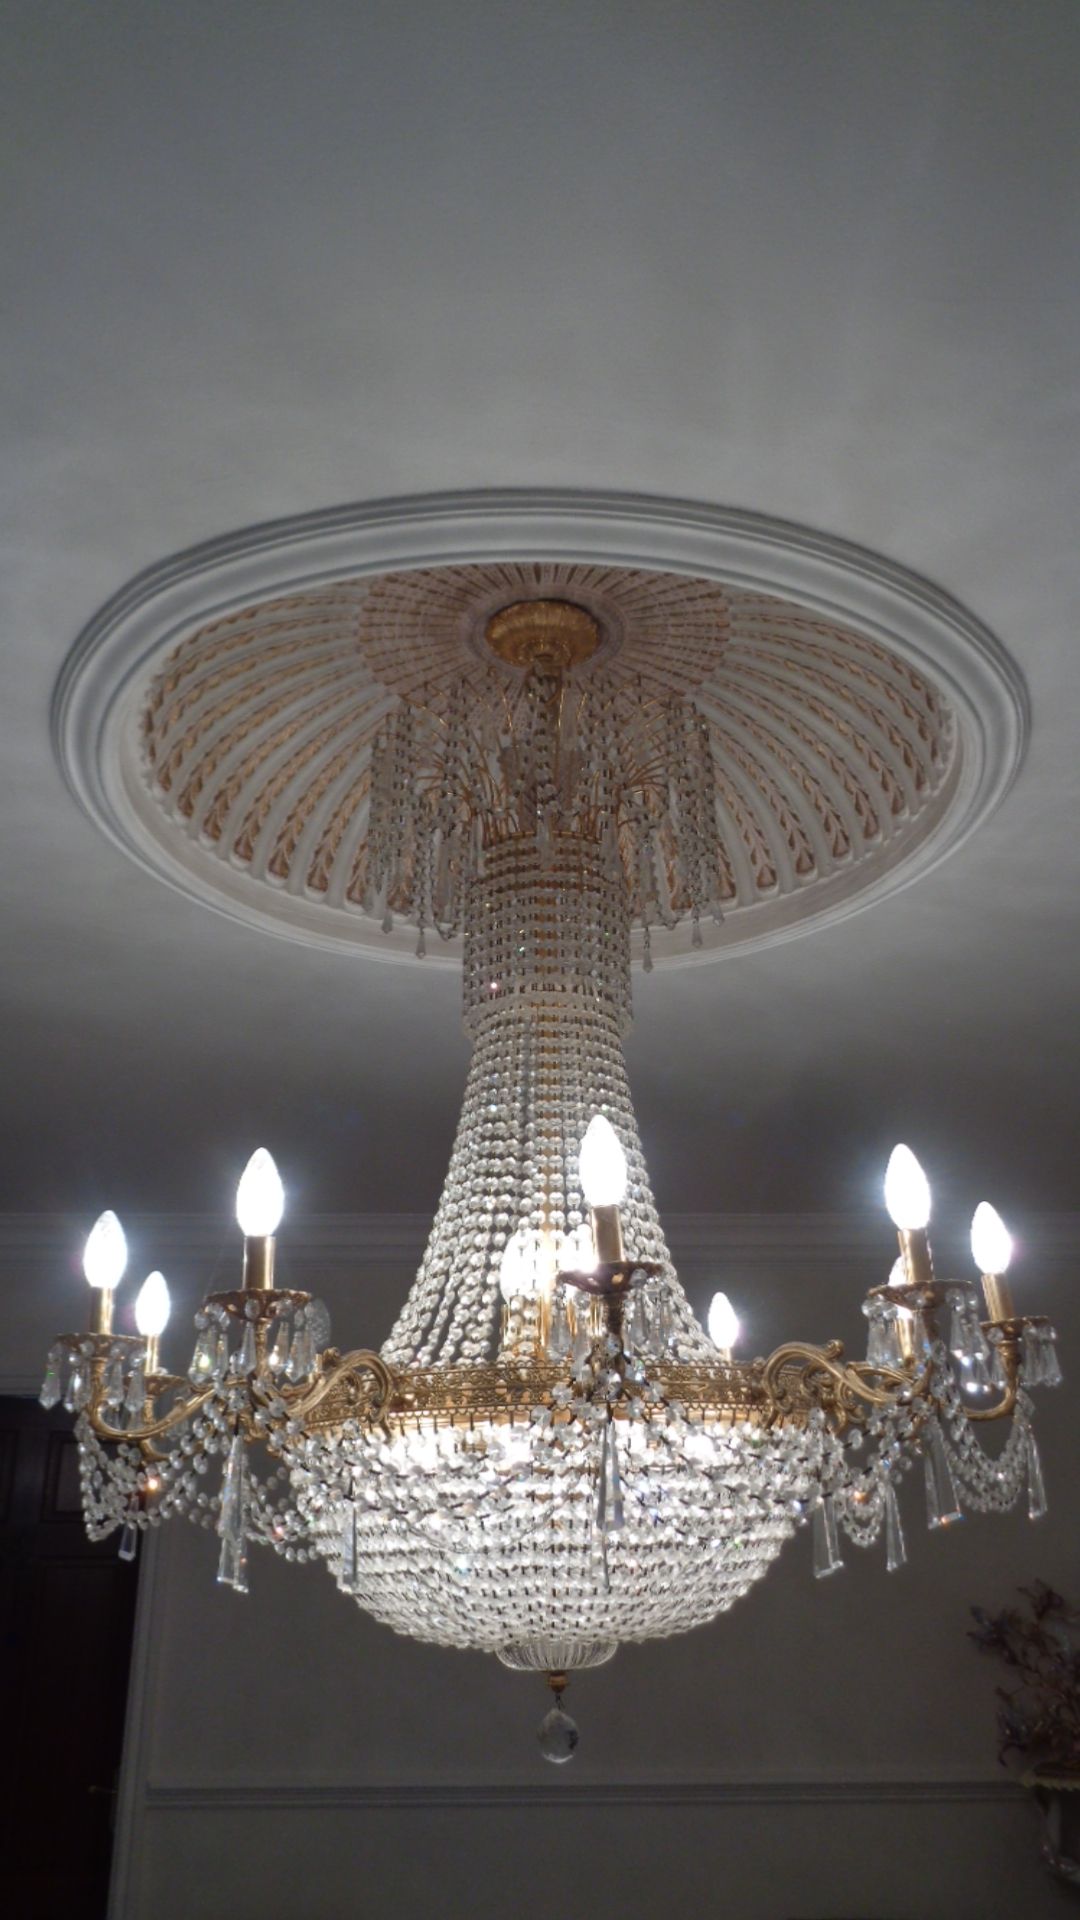 Swarovski Crystals Big (10 Bulbs) Chandelier - 126Cms High X 100Cms Wide In Perfect Condition